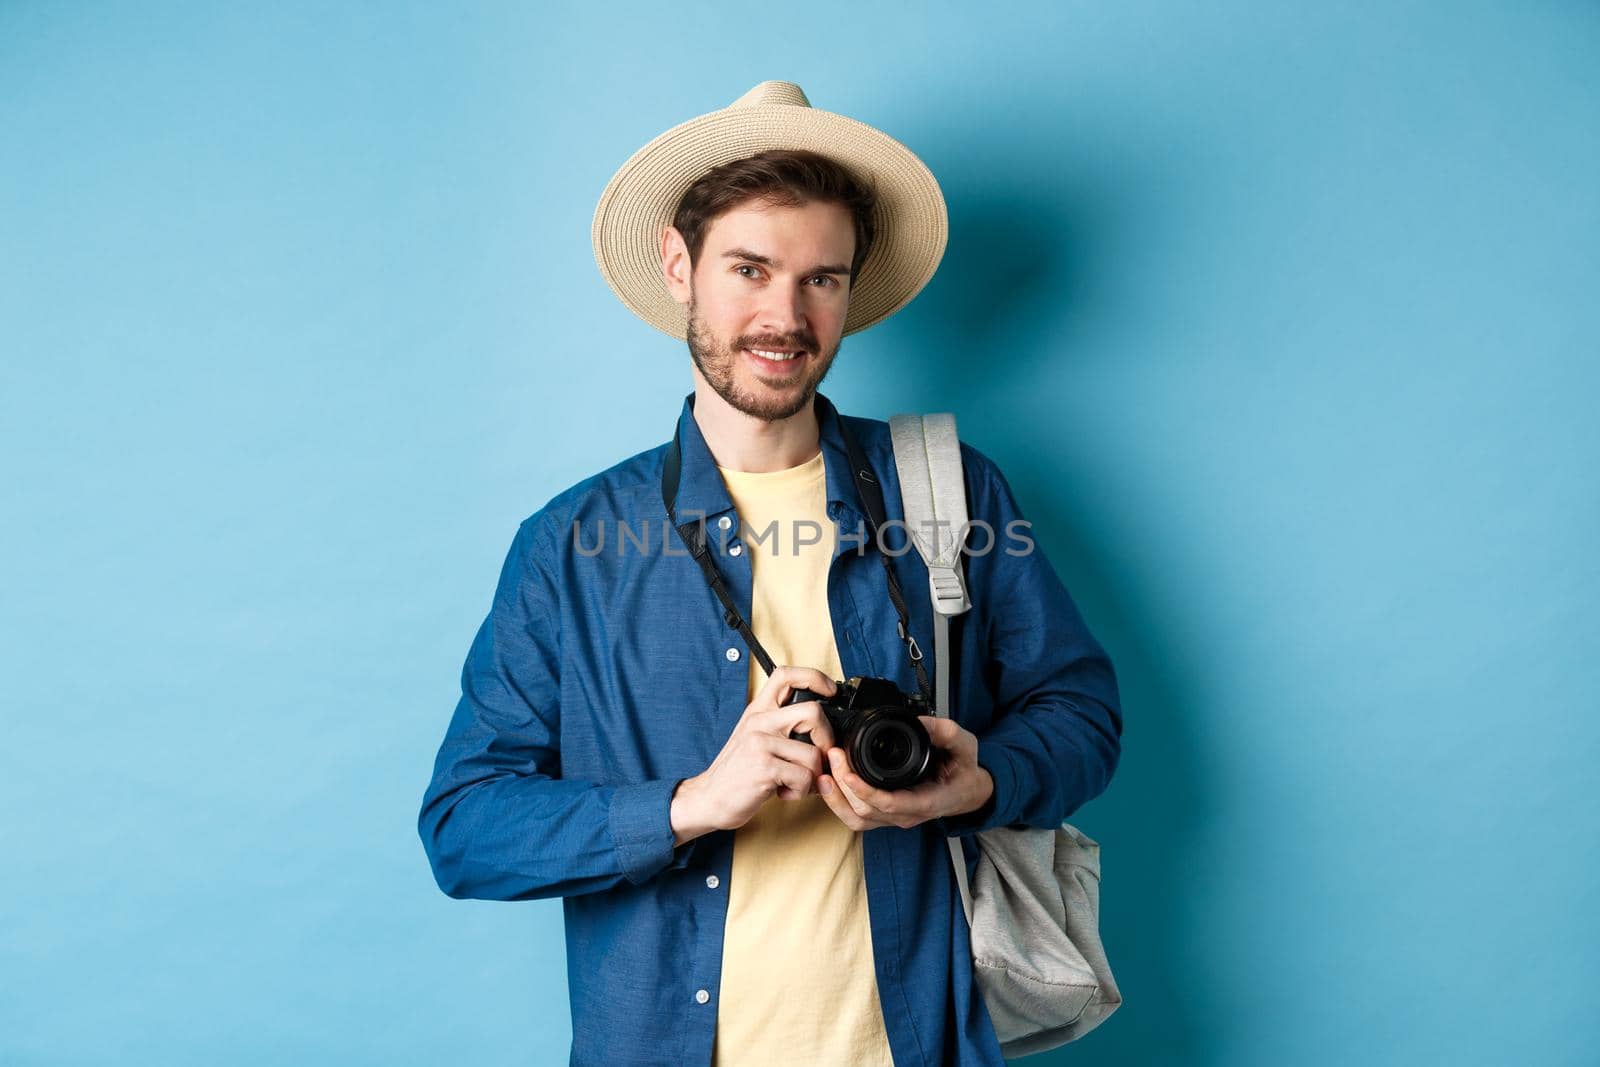 Handsome guy going on summer vacation, backpacking on holiday. Tourist with straw hat and camera smiling happy, standing on blue background.